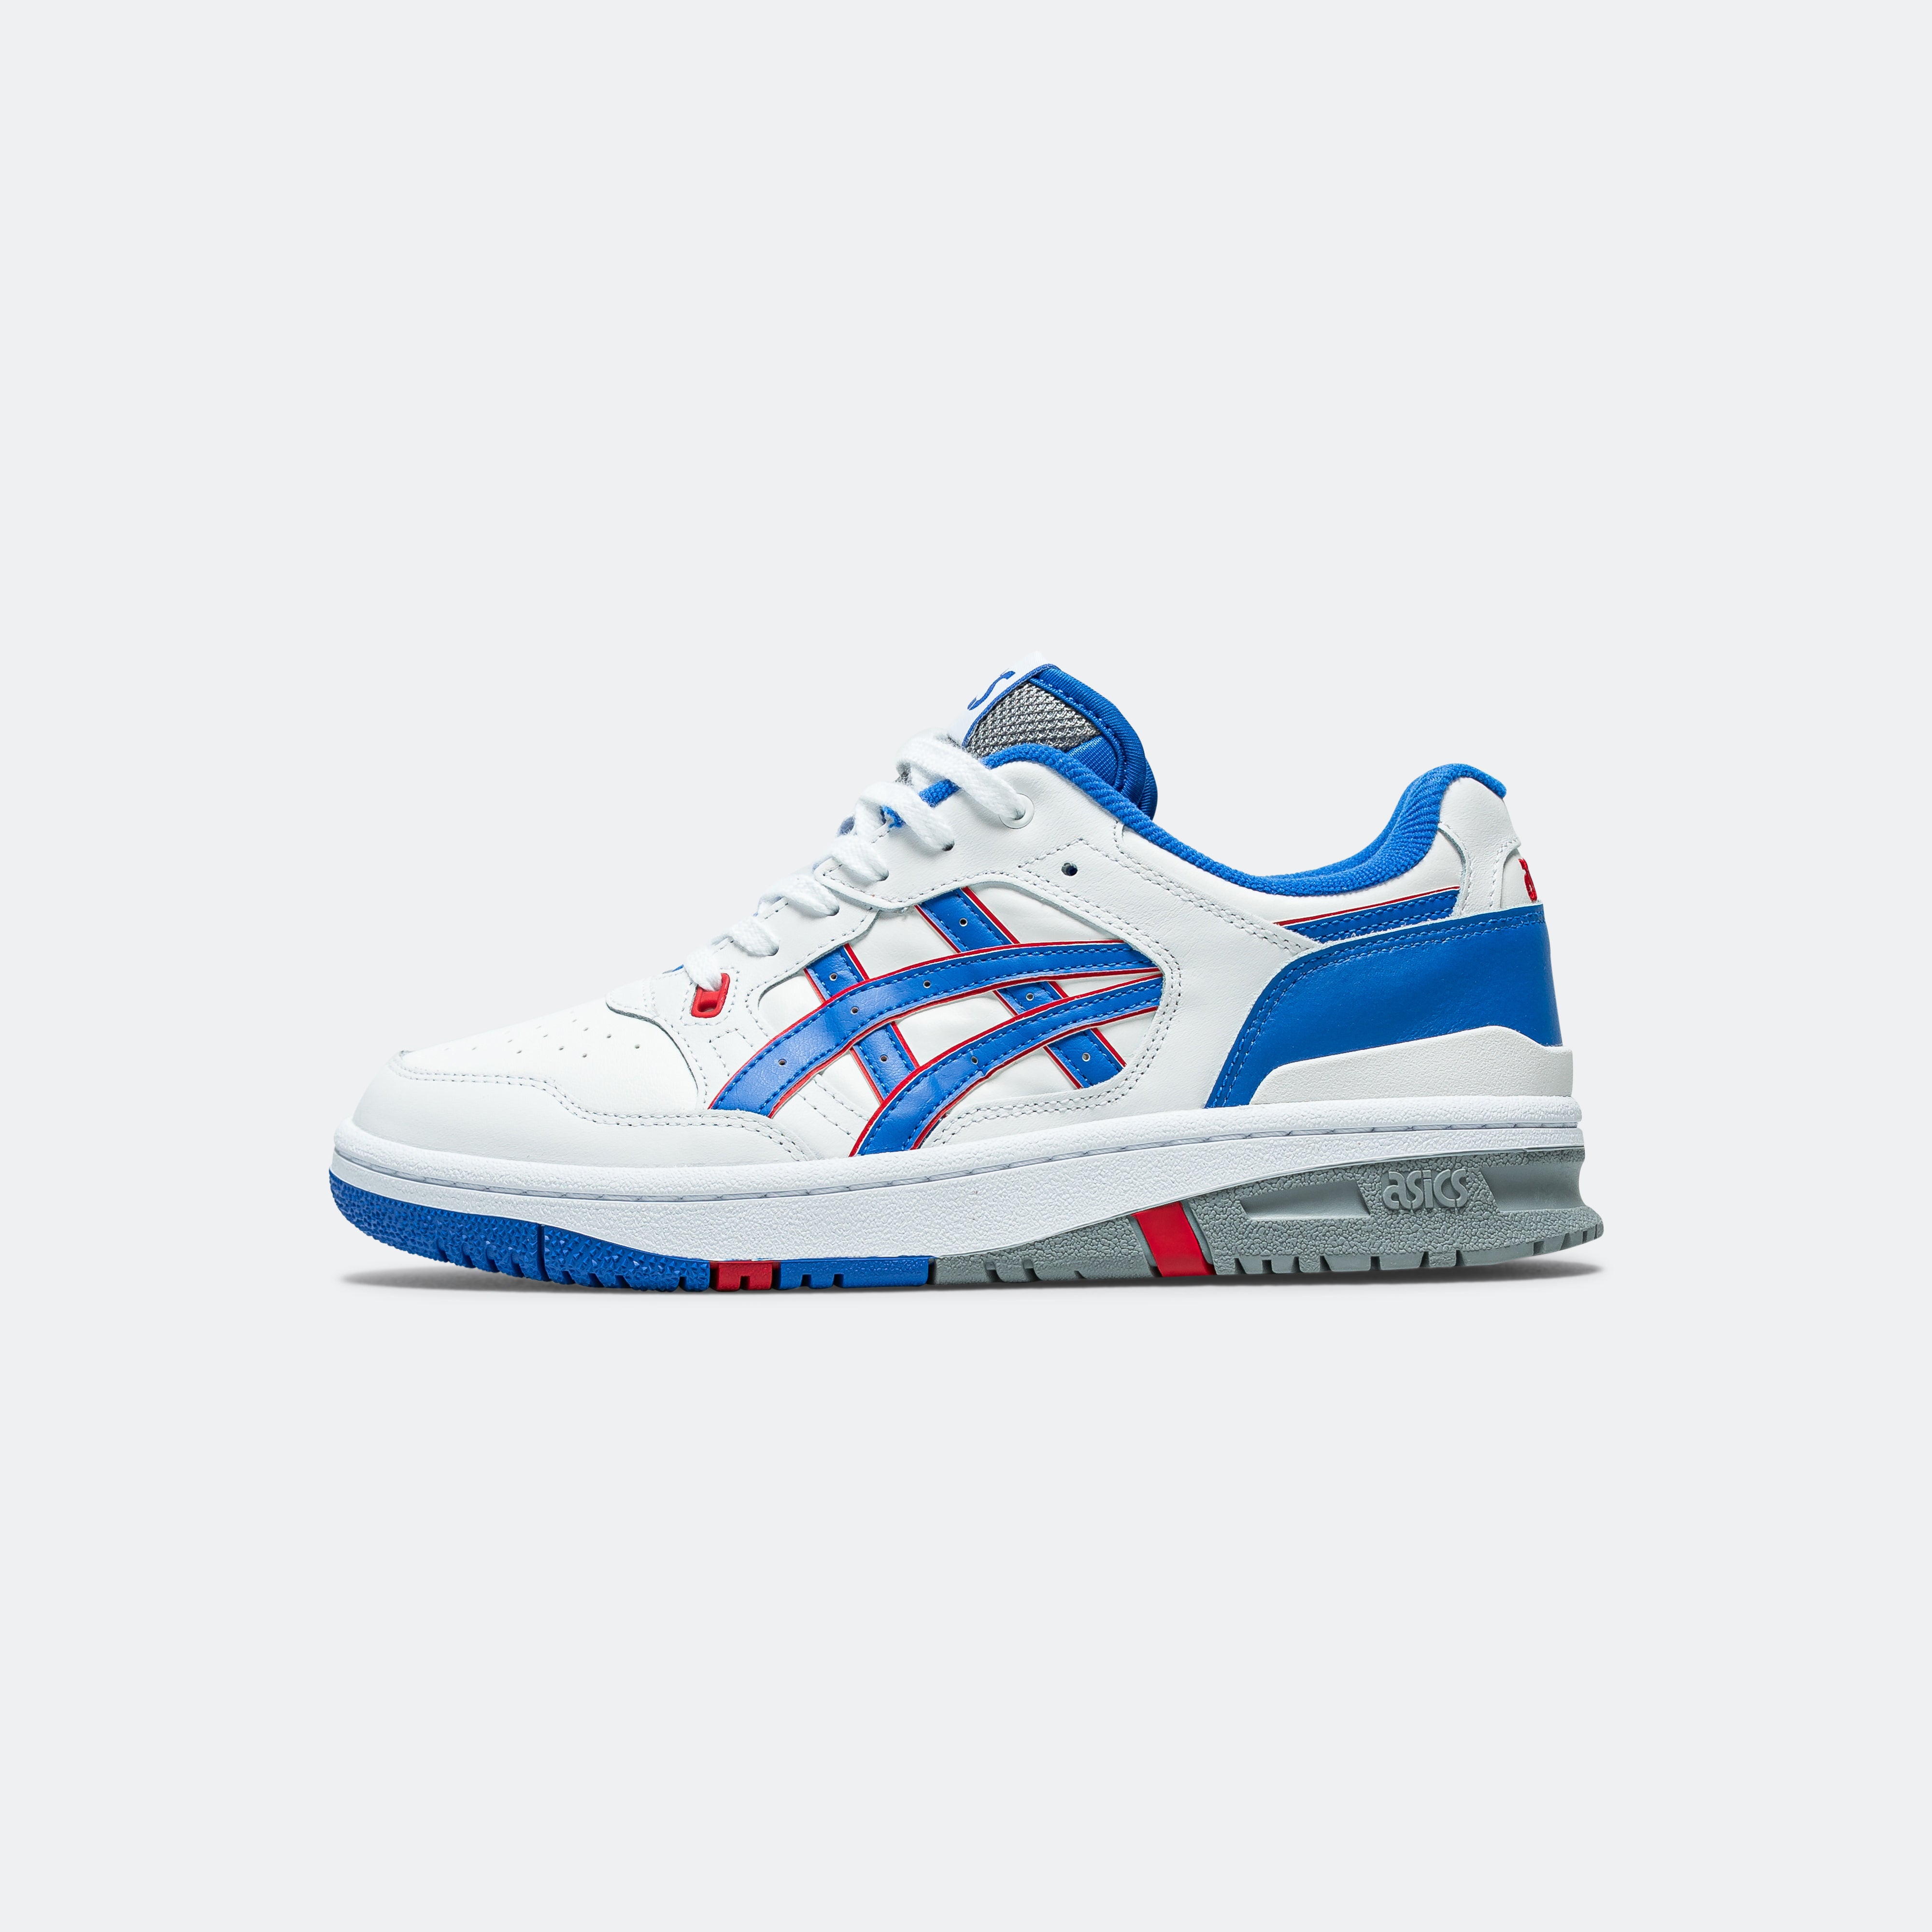 ASICS EX89 'Knicks' - White/Illusion Blue | Up There | UP THERE